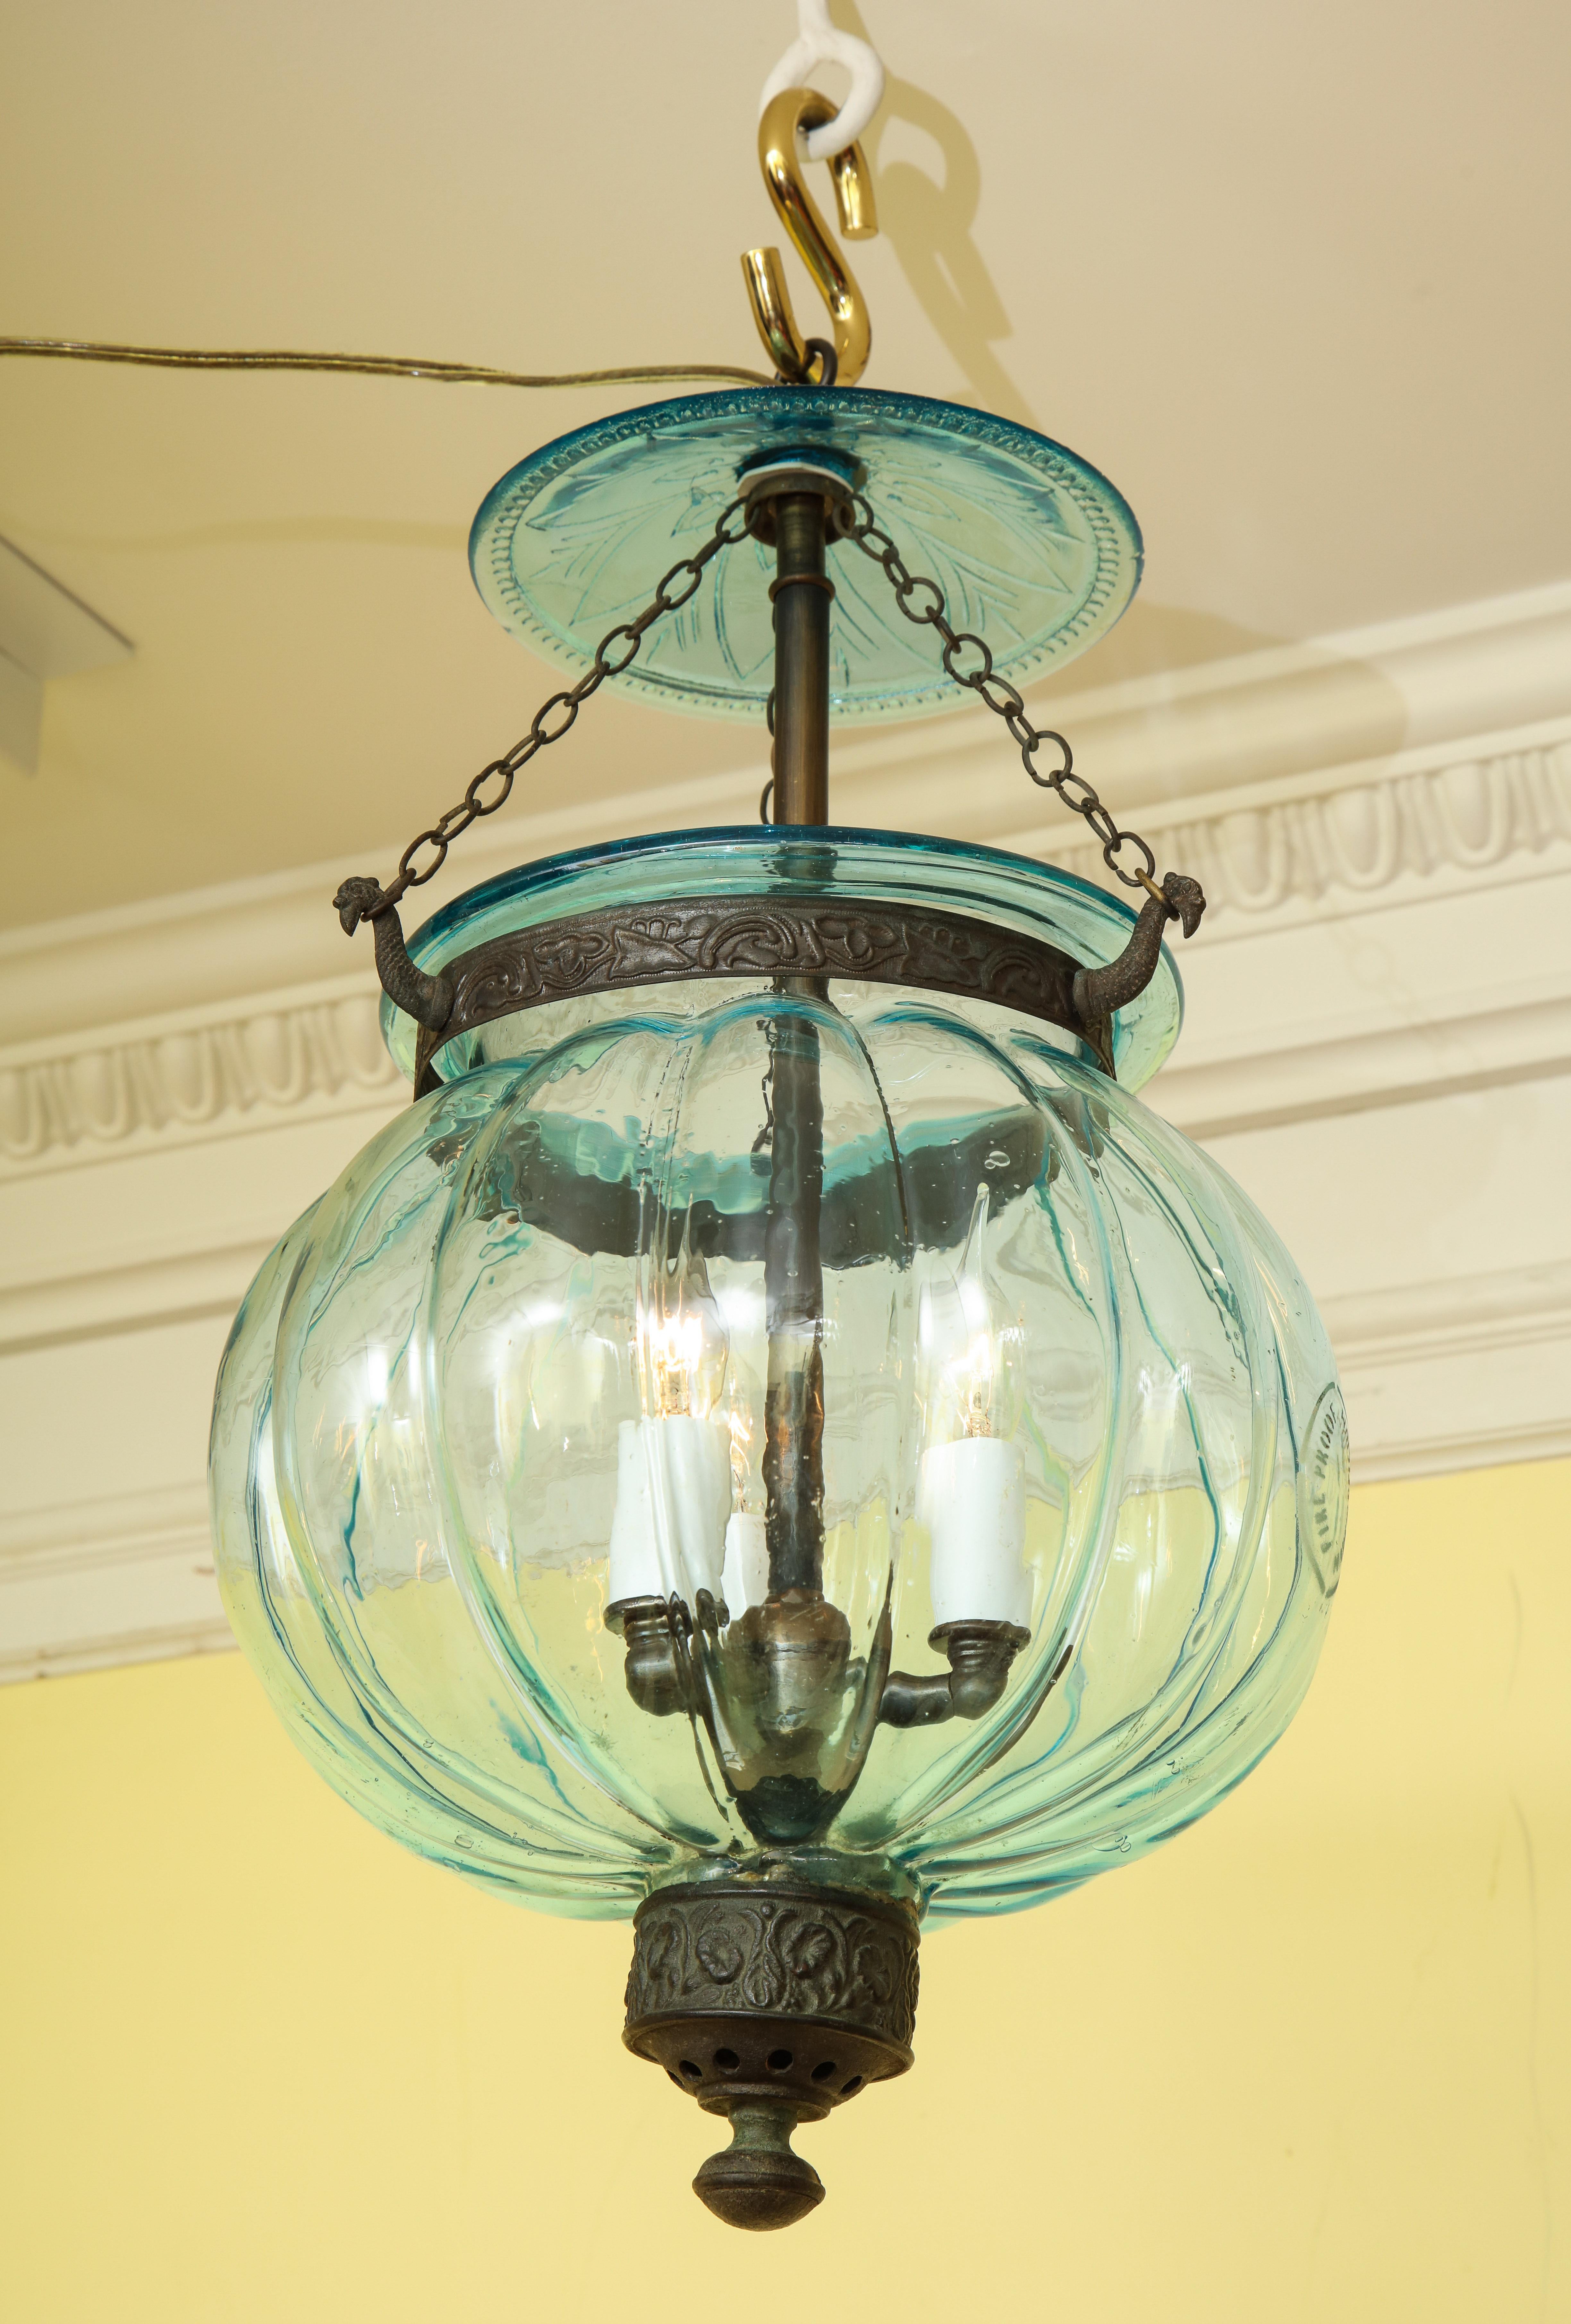 Fine aqua blue melon form glass three-light Lantern having a stamped glass lid with matching blue lobed body. Stamped 